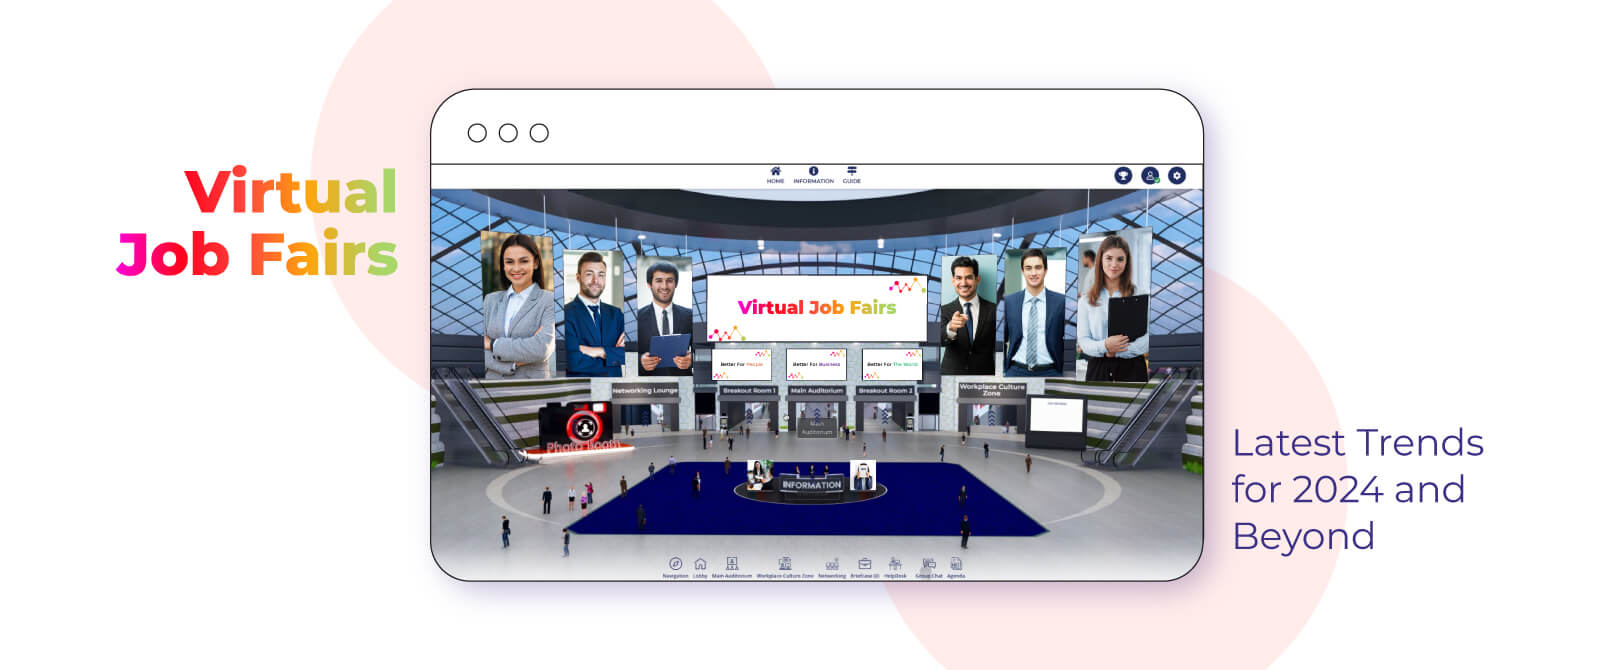 Virtual Job Fairs: Latest Trends for 2024 and Beyond